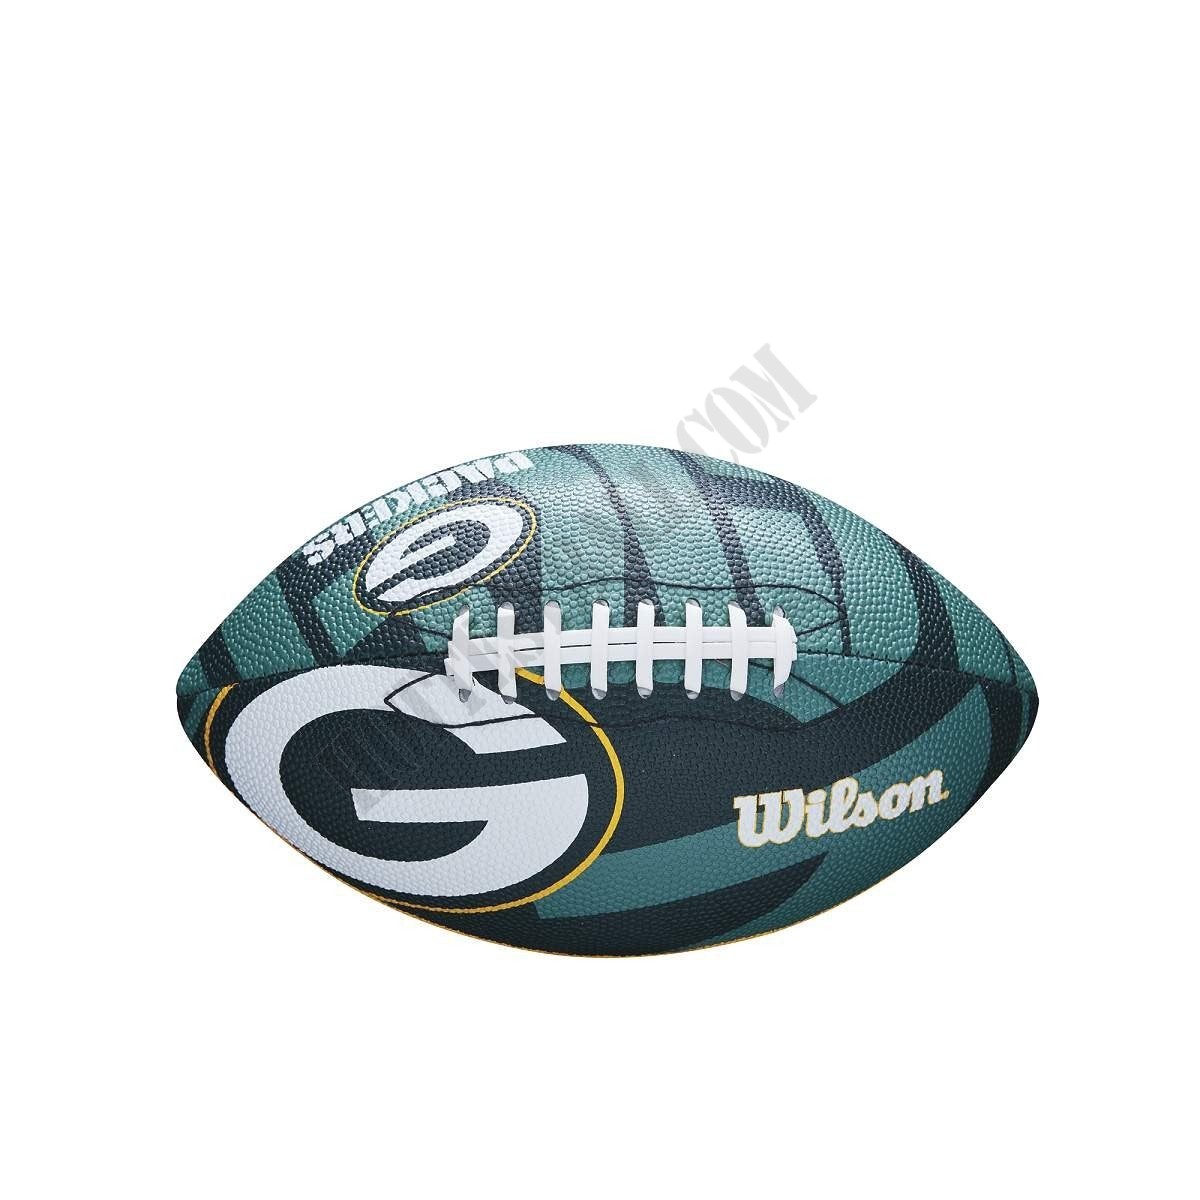 NFL Team Tailgate Football - Green Bay Packers ● Wilson Promotions - -1